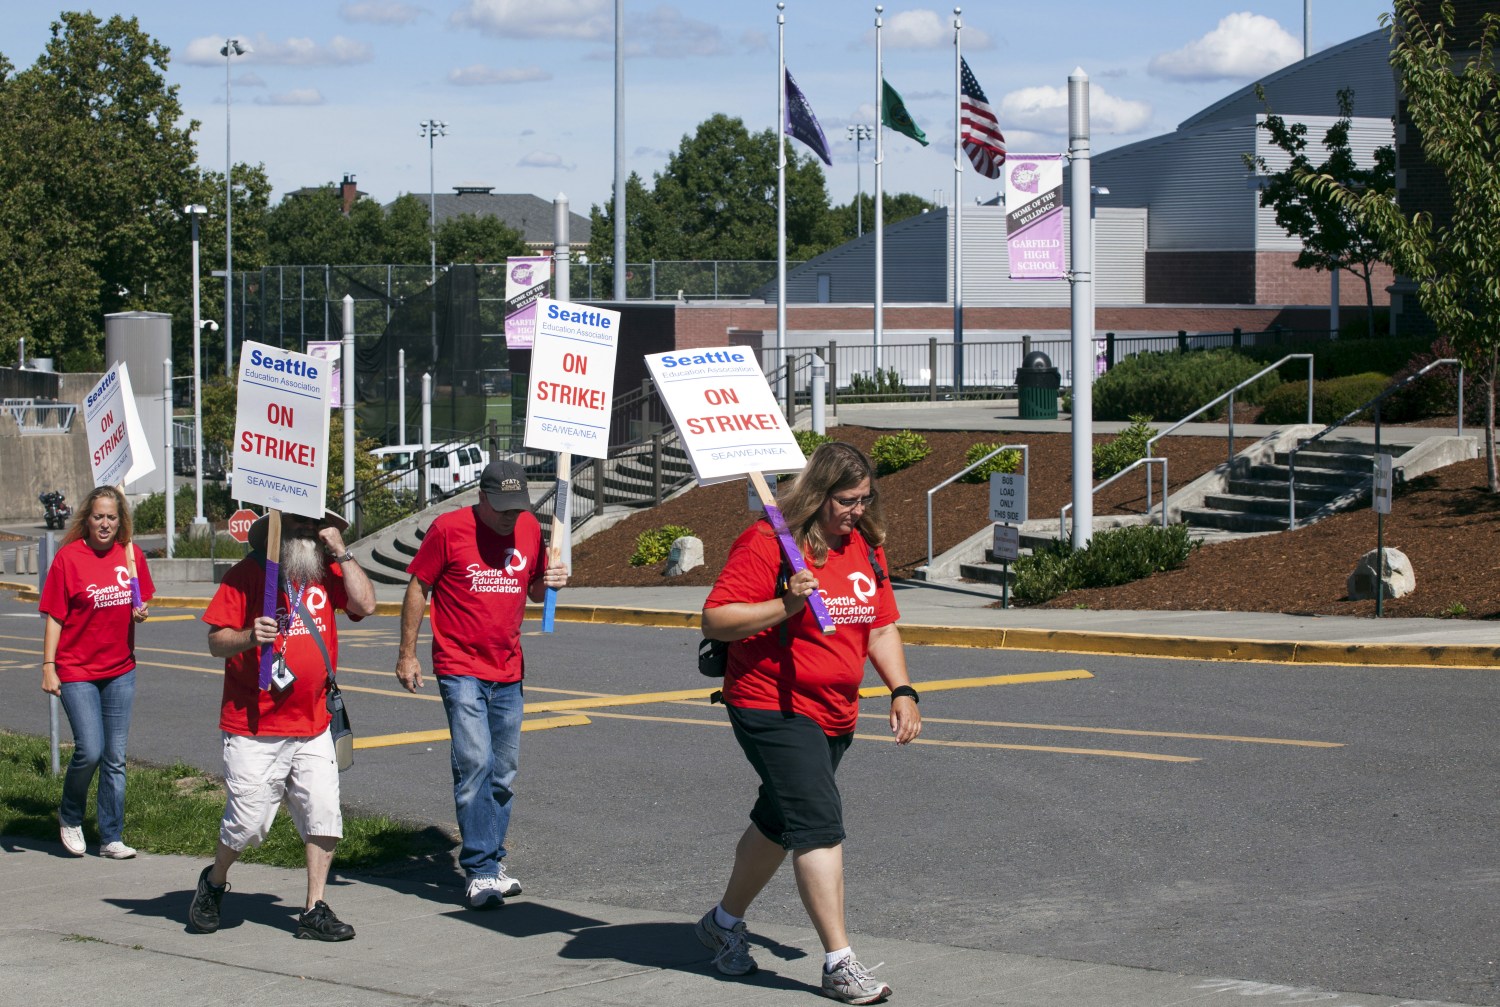 Teachers walk the picket line as they strike outside Garfield High School in Seattle, Washington September 9, 2015. Classes were cancelled for 53,000 students as Seattle teachers and support staff marched in picket lines on Wednesday on what was supposed to be the first day of school, waging their first such strike in three decades after contract talks between the school district and the teachers' union failed.  REUTERS/Matt Mills McKnight - GF10000199643